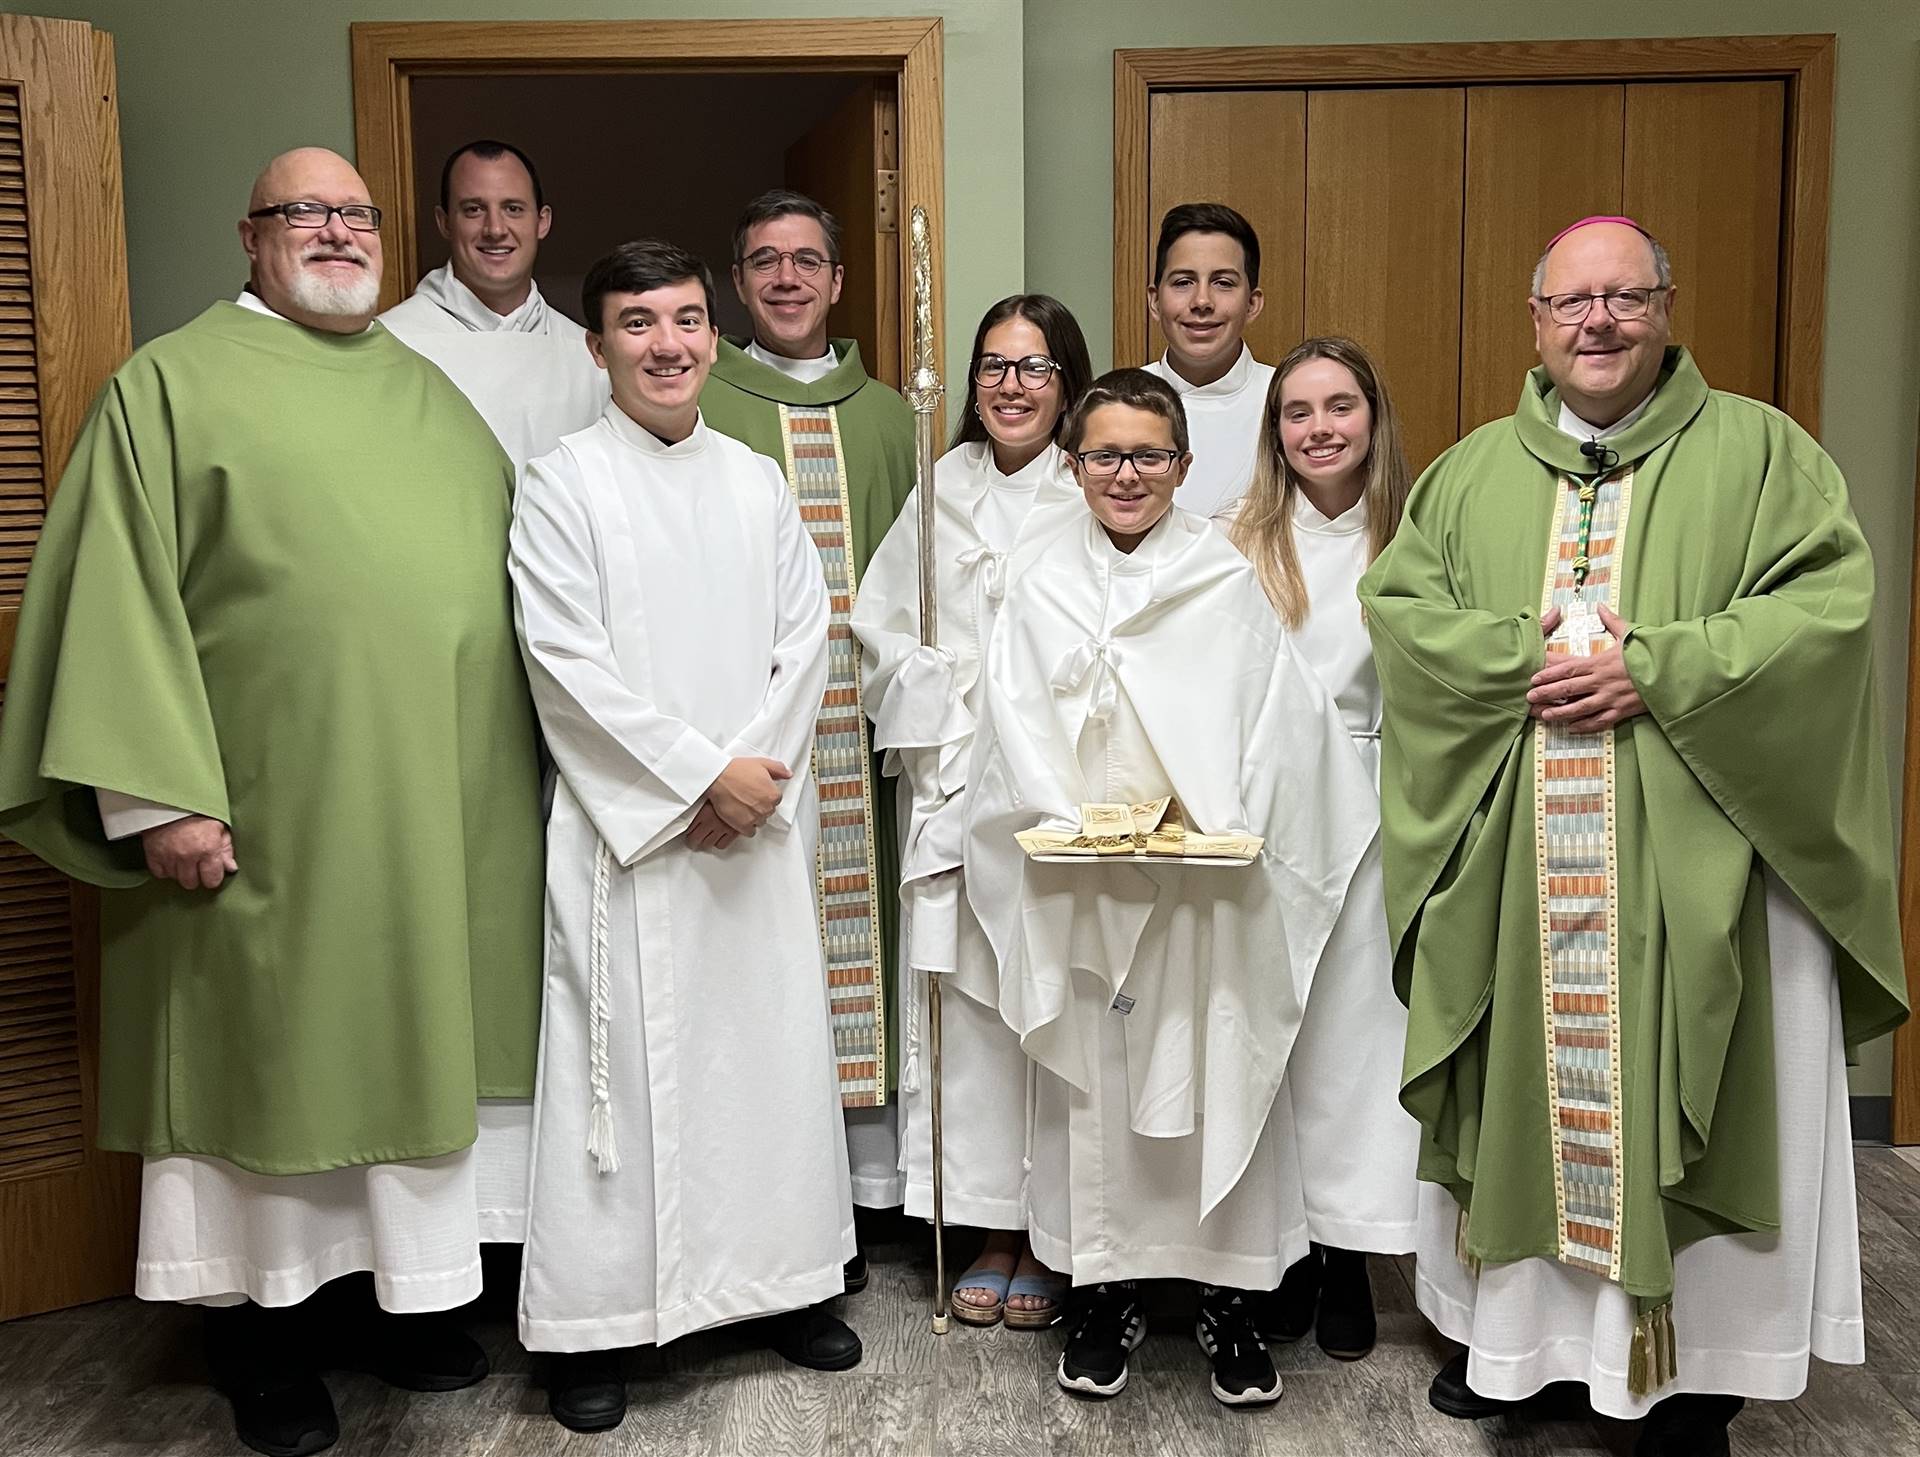 servers, seminarians, deacon, priest, all pose with bishop malesik